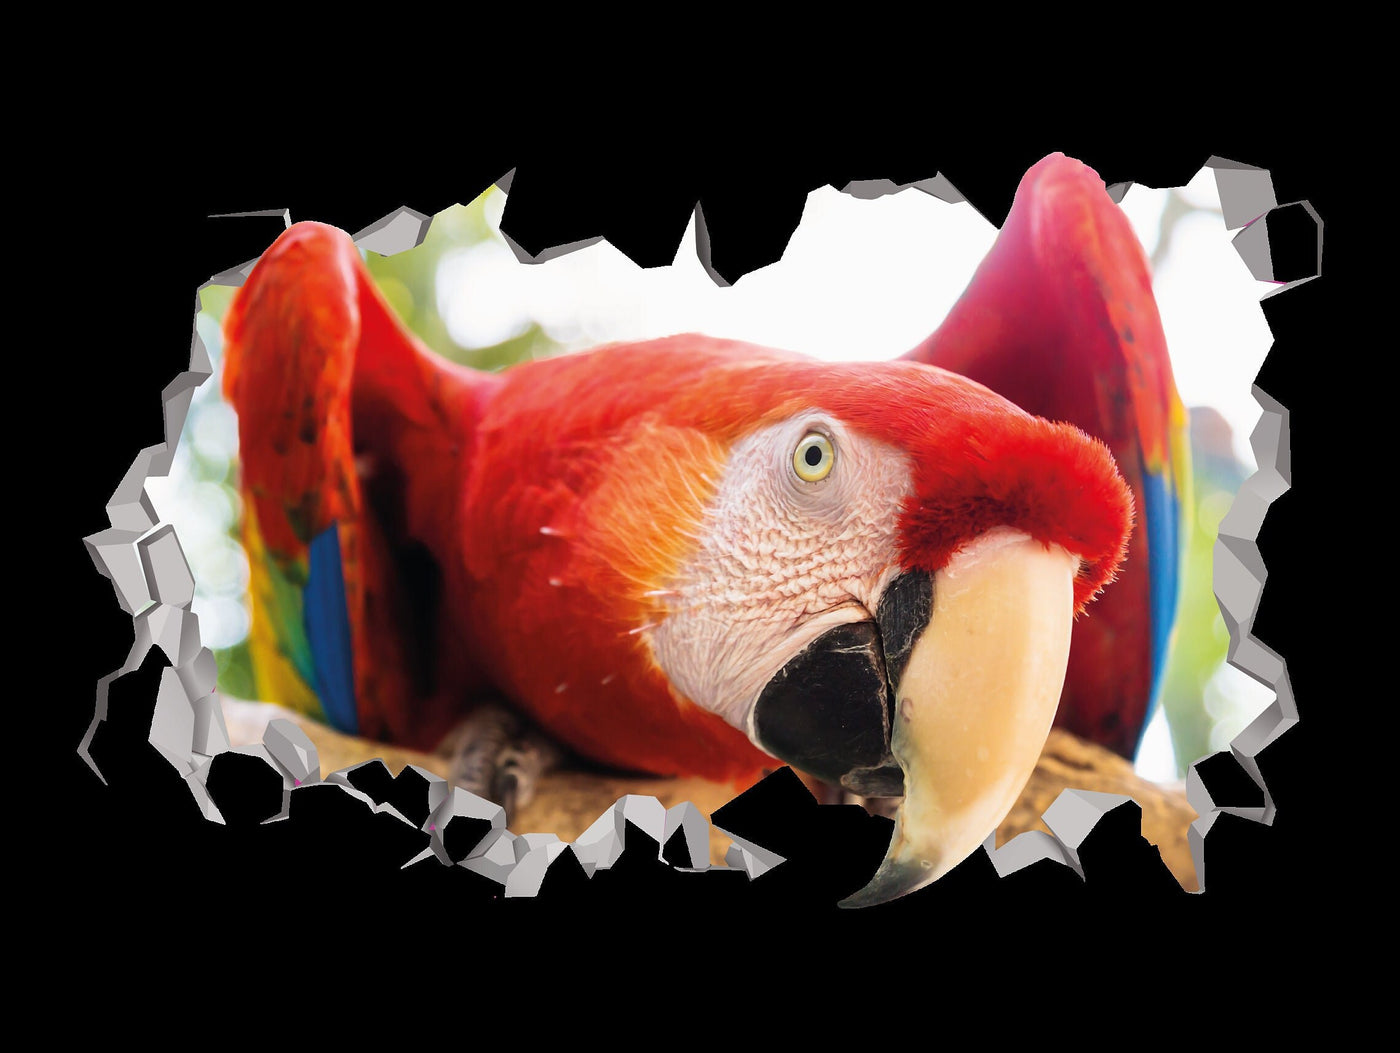 Macaw Wall Decal - Macaw Sticker - Macaw Red and Yellow - Macaw Scarlet Charm - Macaw Ornament - Macaw 3d Art Decor - Macaw Animal Tropical